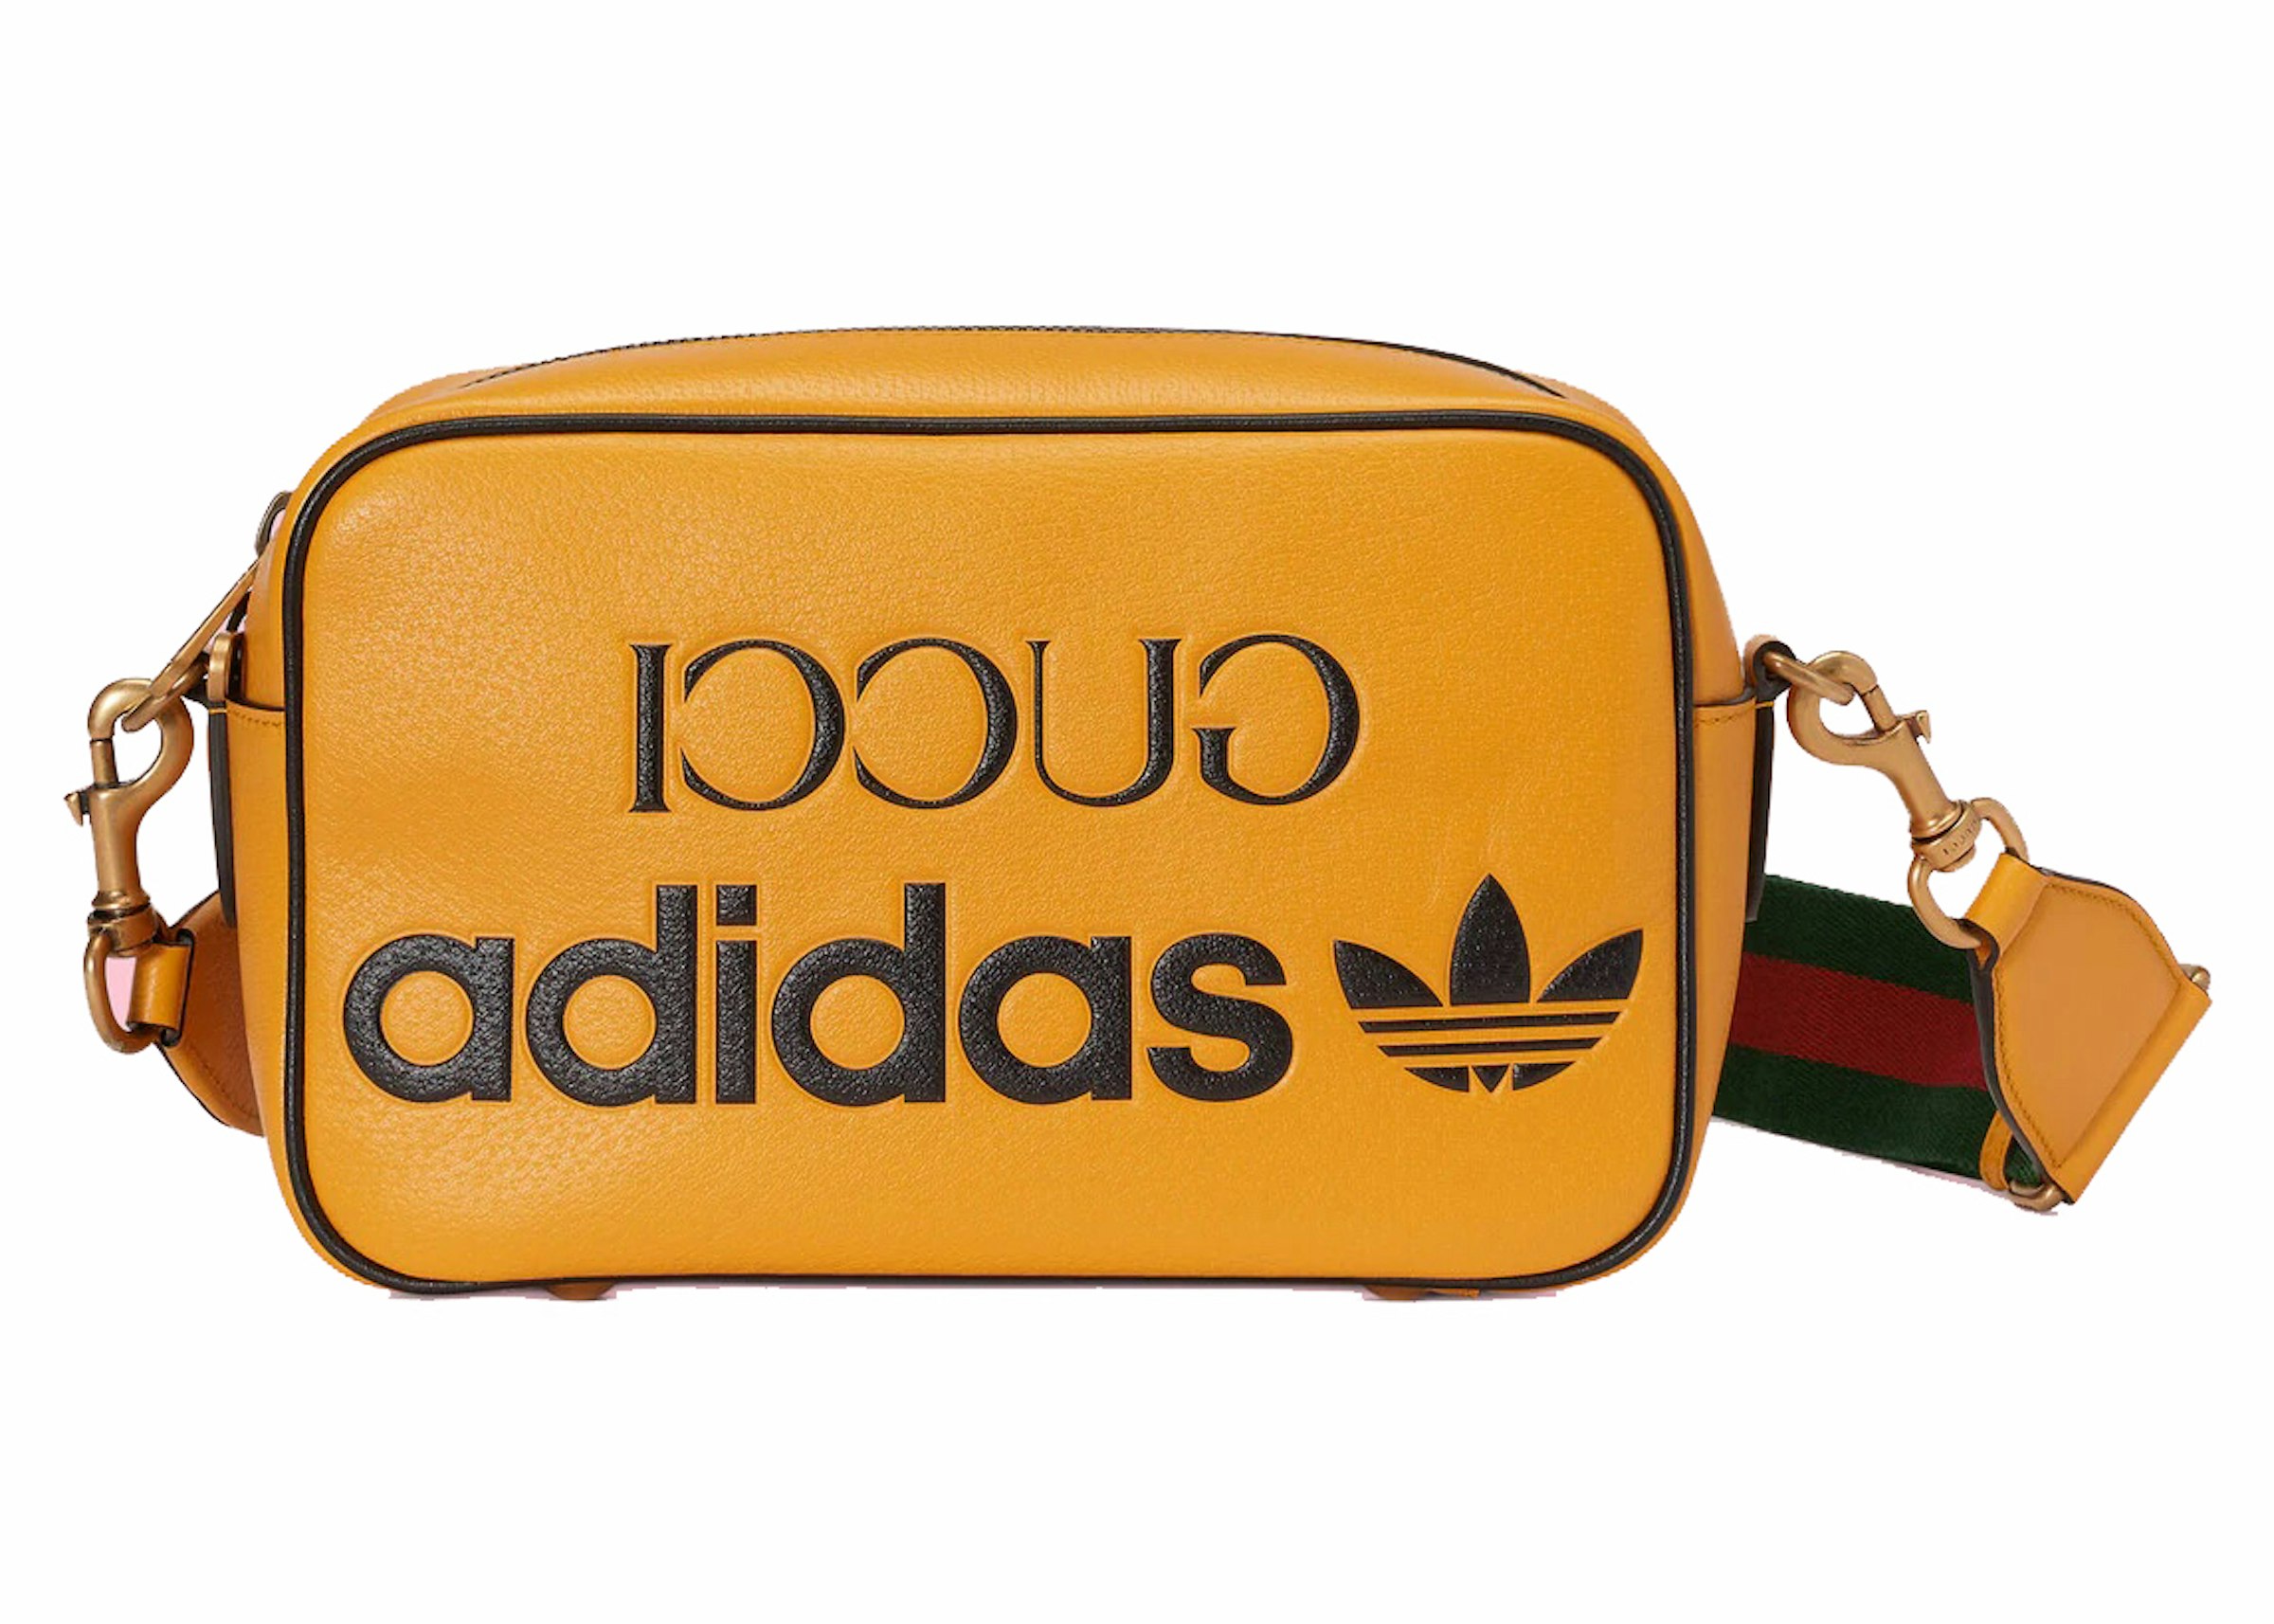 Gucci x adidas Small Shoulder Bag Yellow in Leather with Gold-tone US